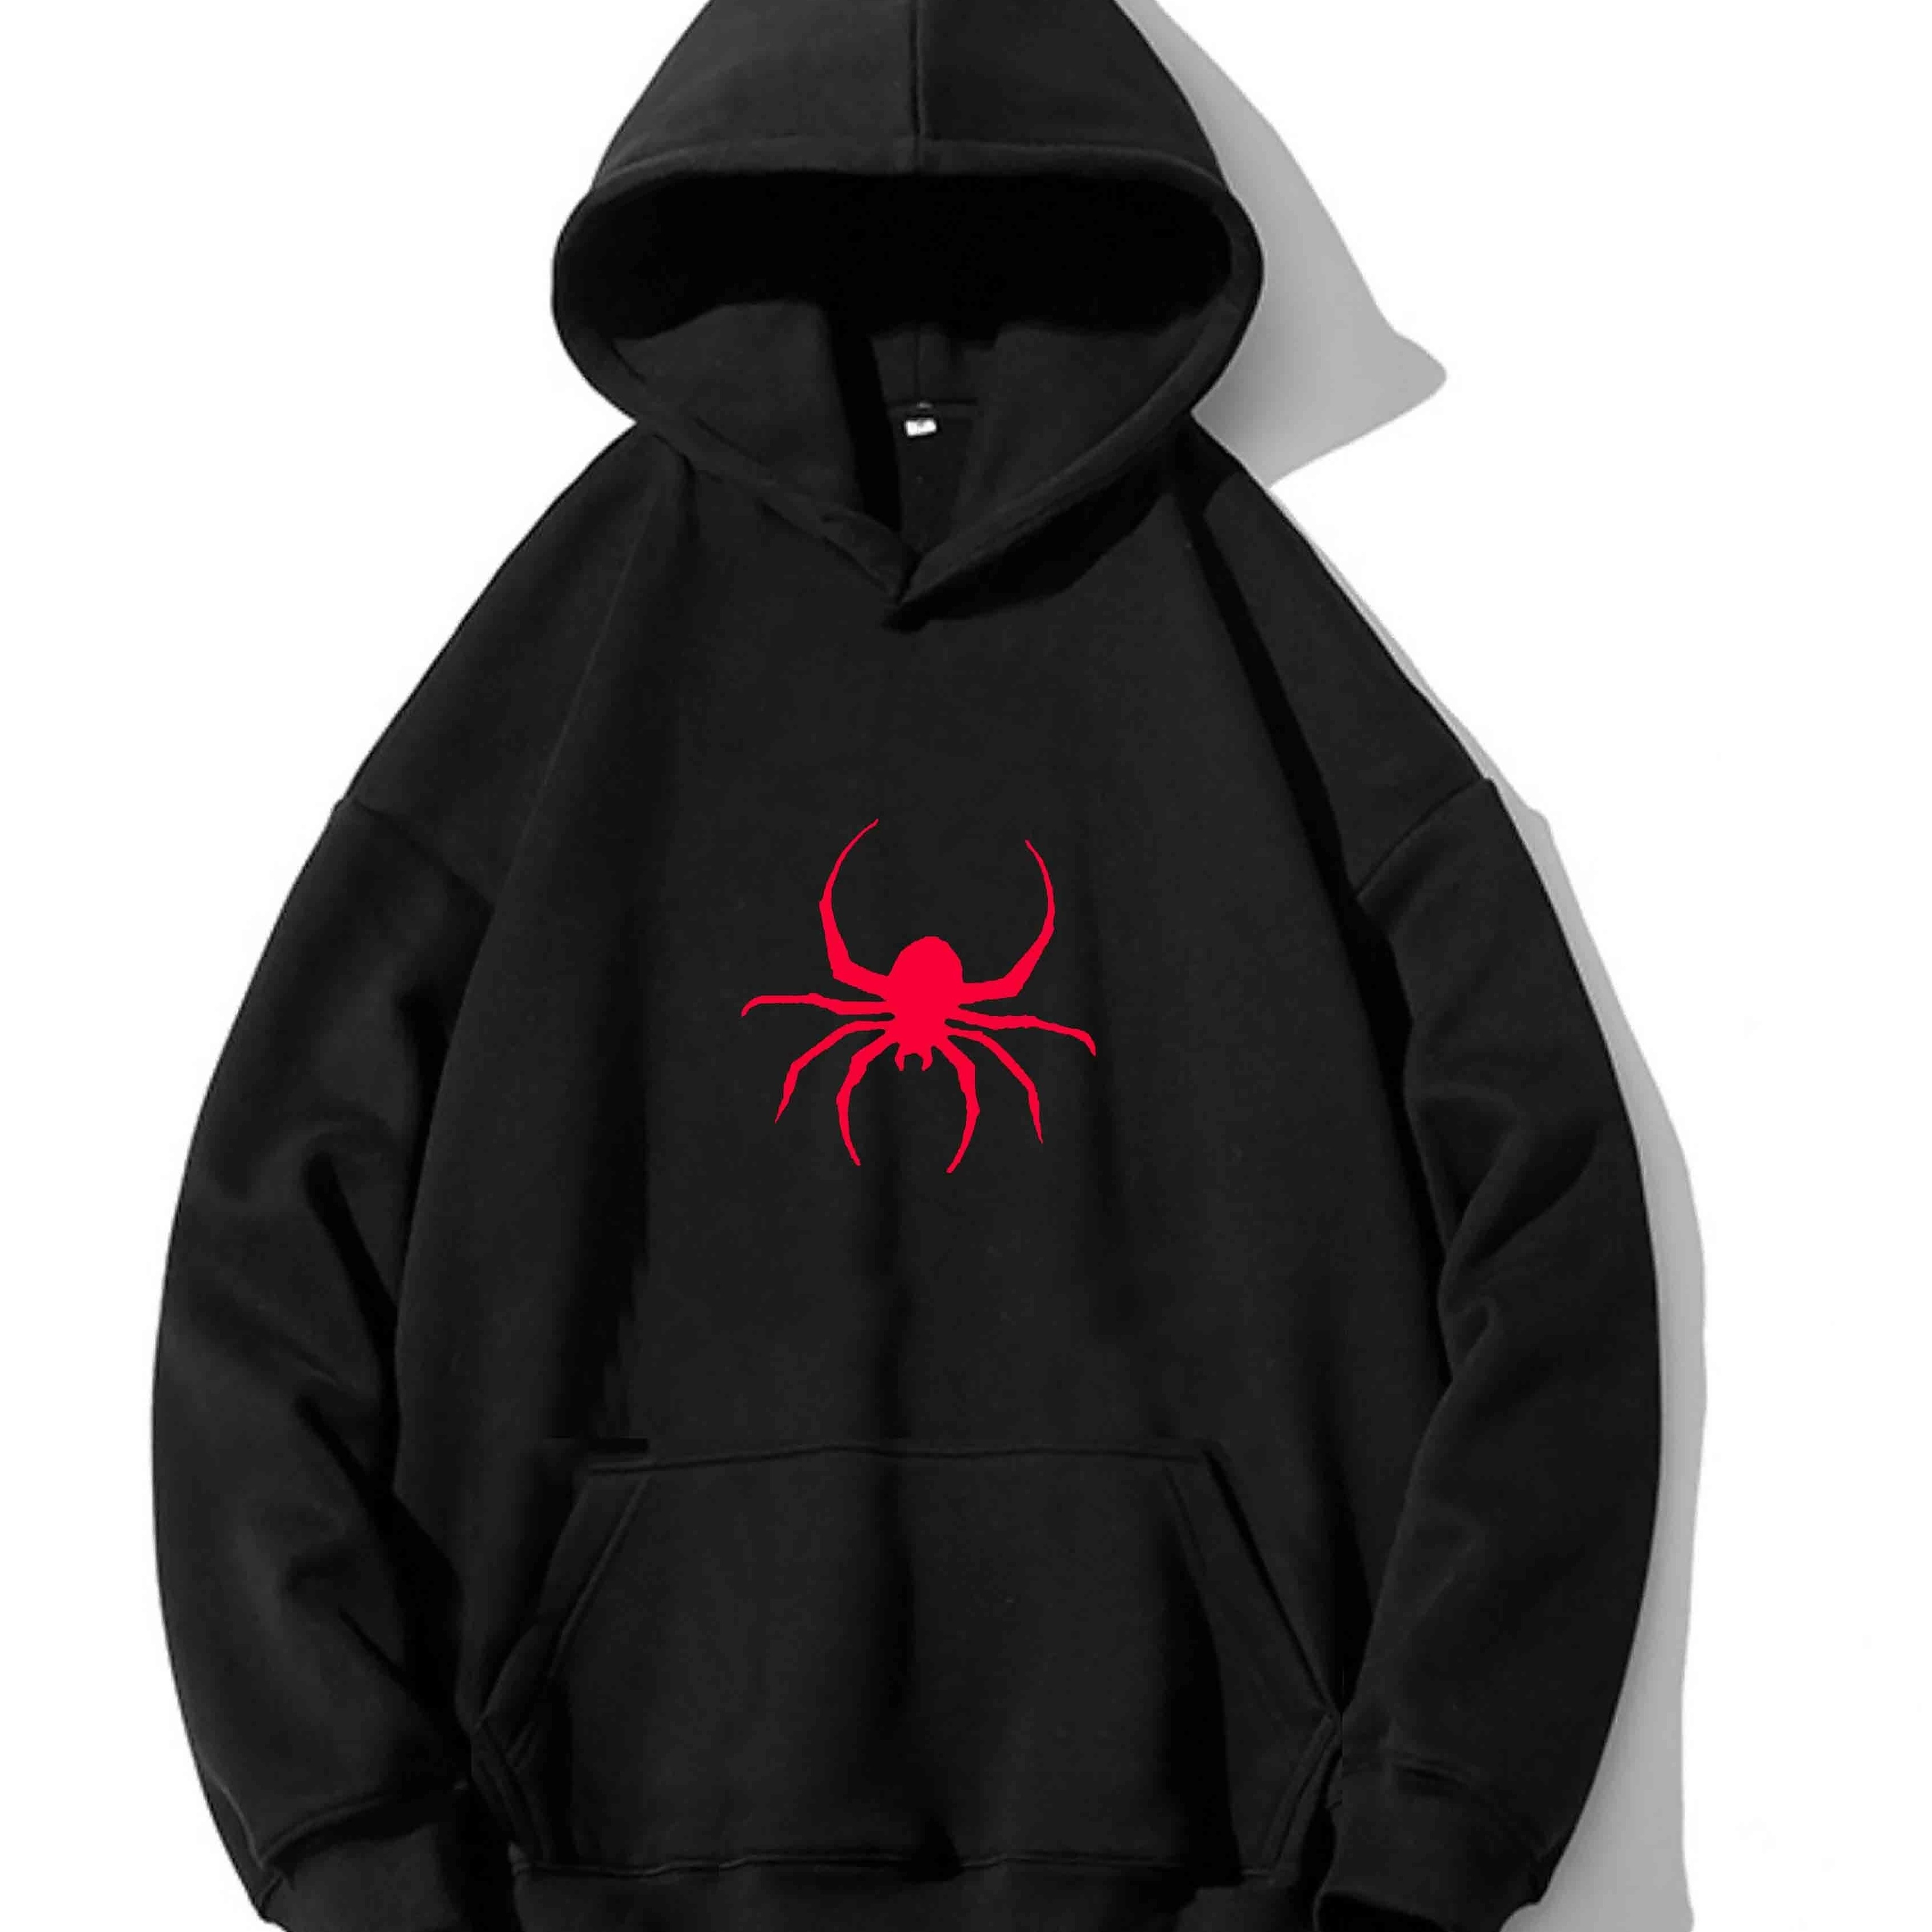 

Spider Print Hoodie, Hoodies For Men, Men's Casual Graphic Design Pullover Hooded Sweatshirt With Kangaroo Pocket For Spring Fall, As Gifts